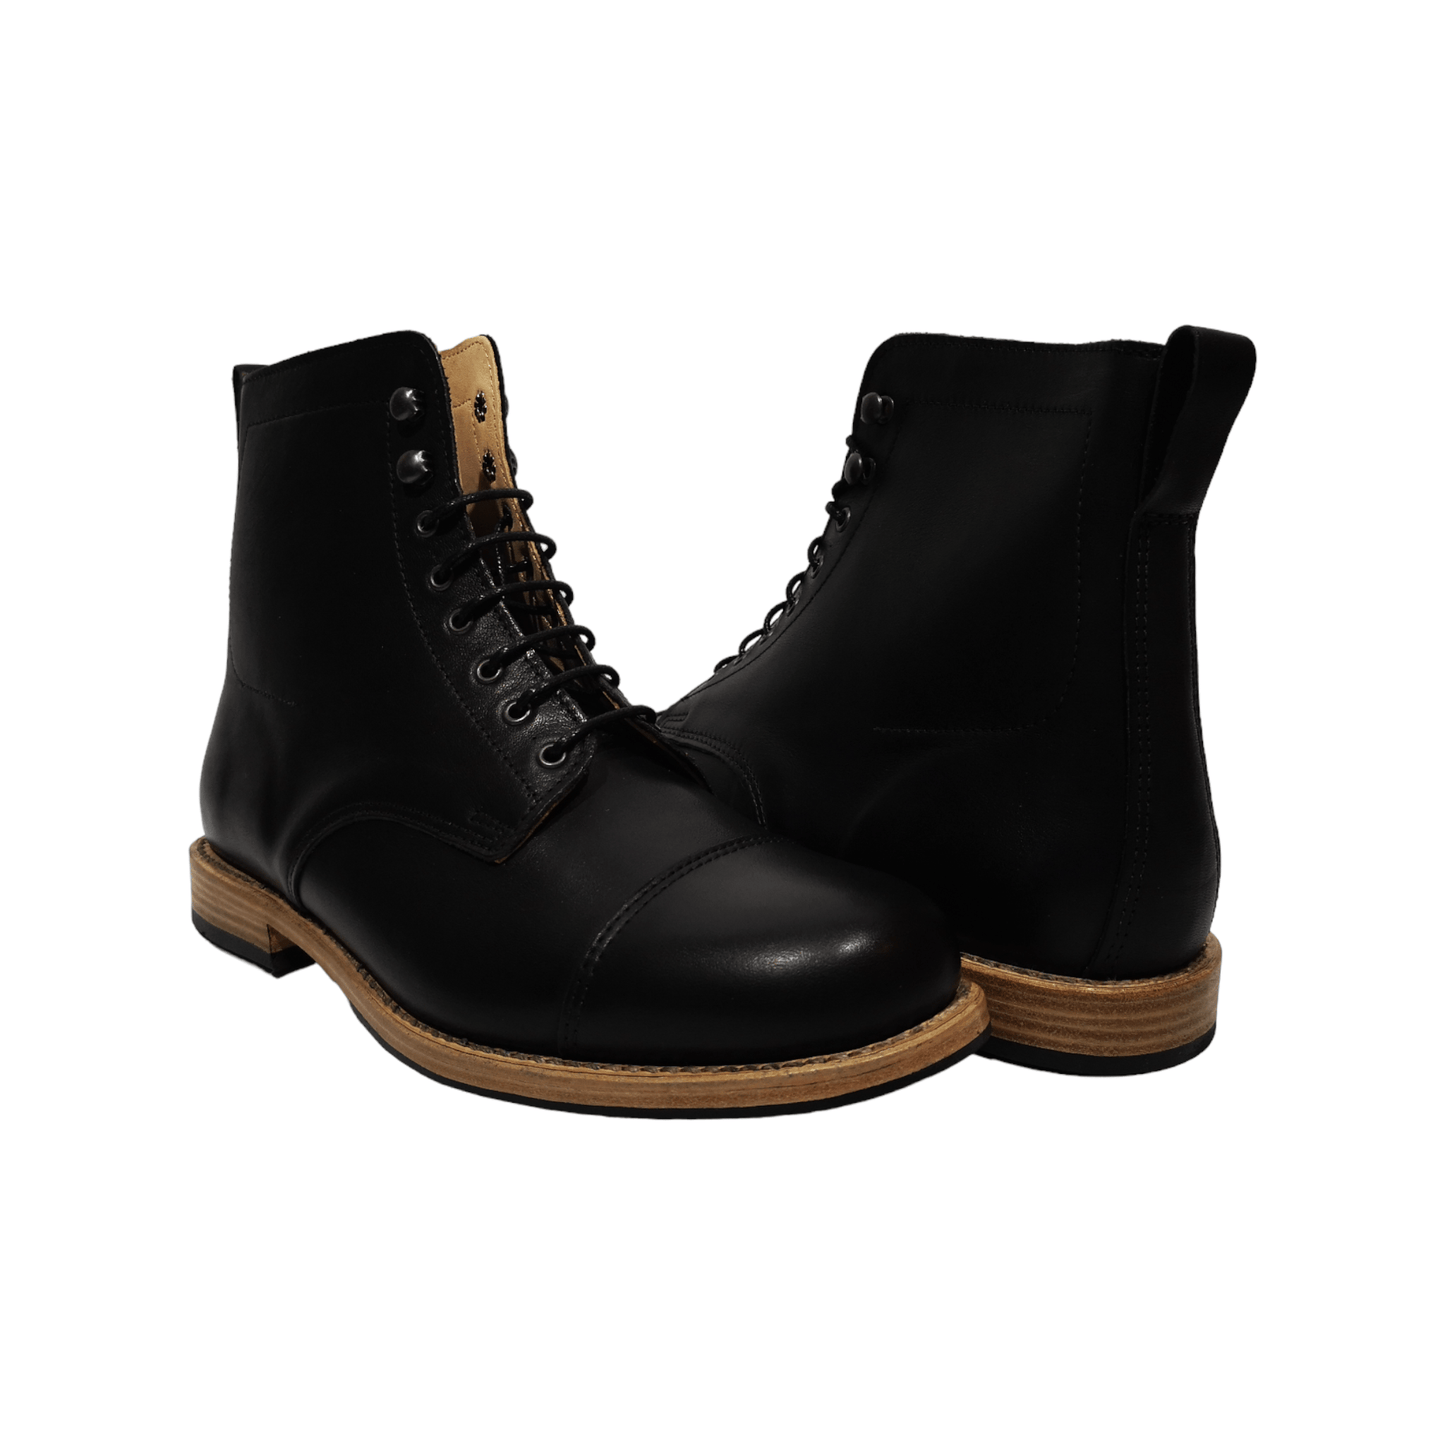 Tâmega Boots - OldMulla - Boots Store, Handmade By George Family